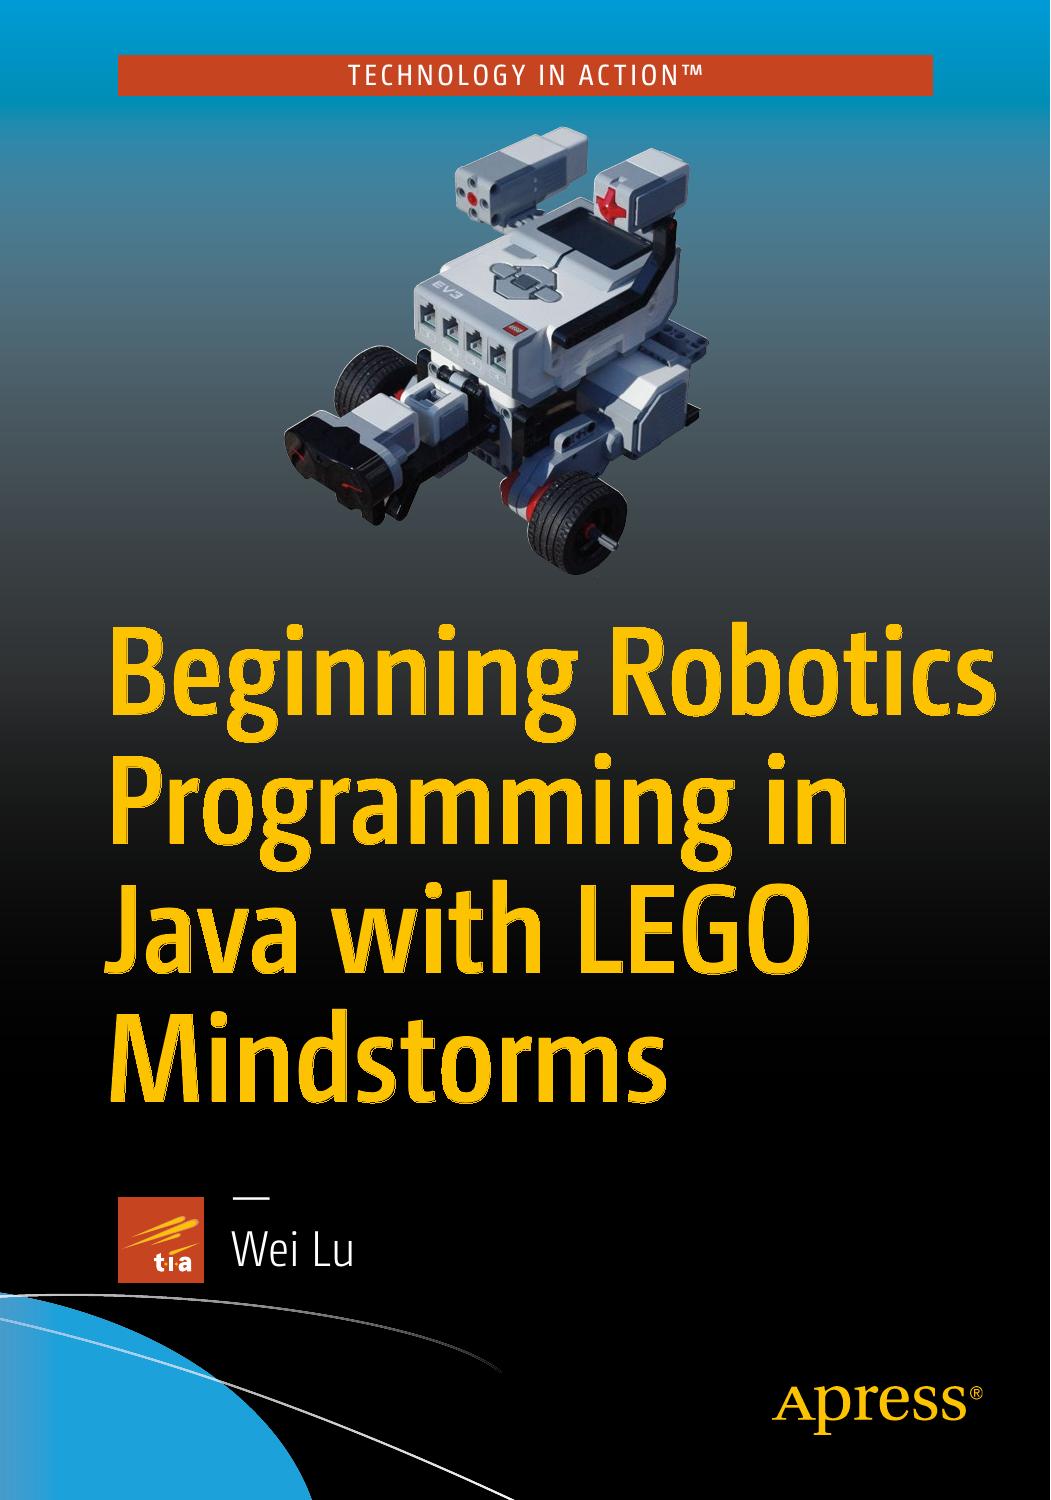 Beginning Robotics Programming in Java with LEGO Mindstorms by Wei Lu